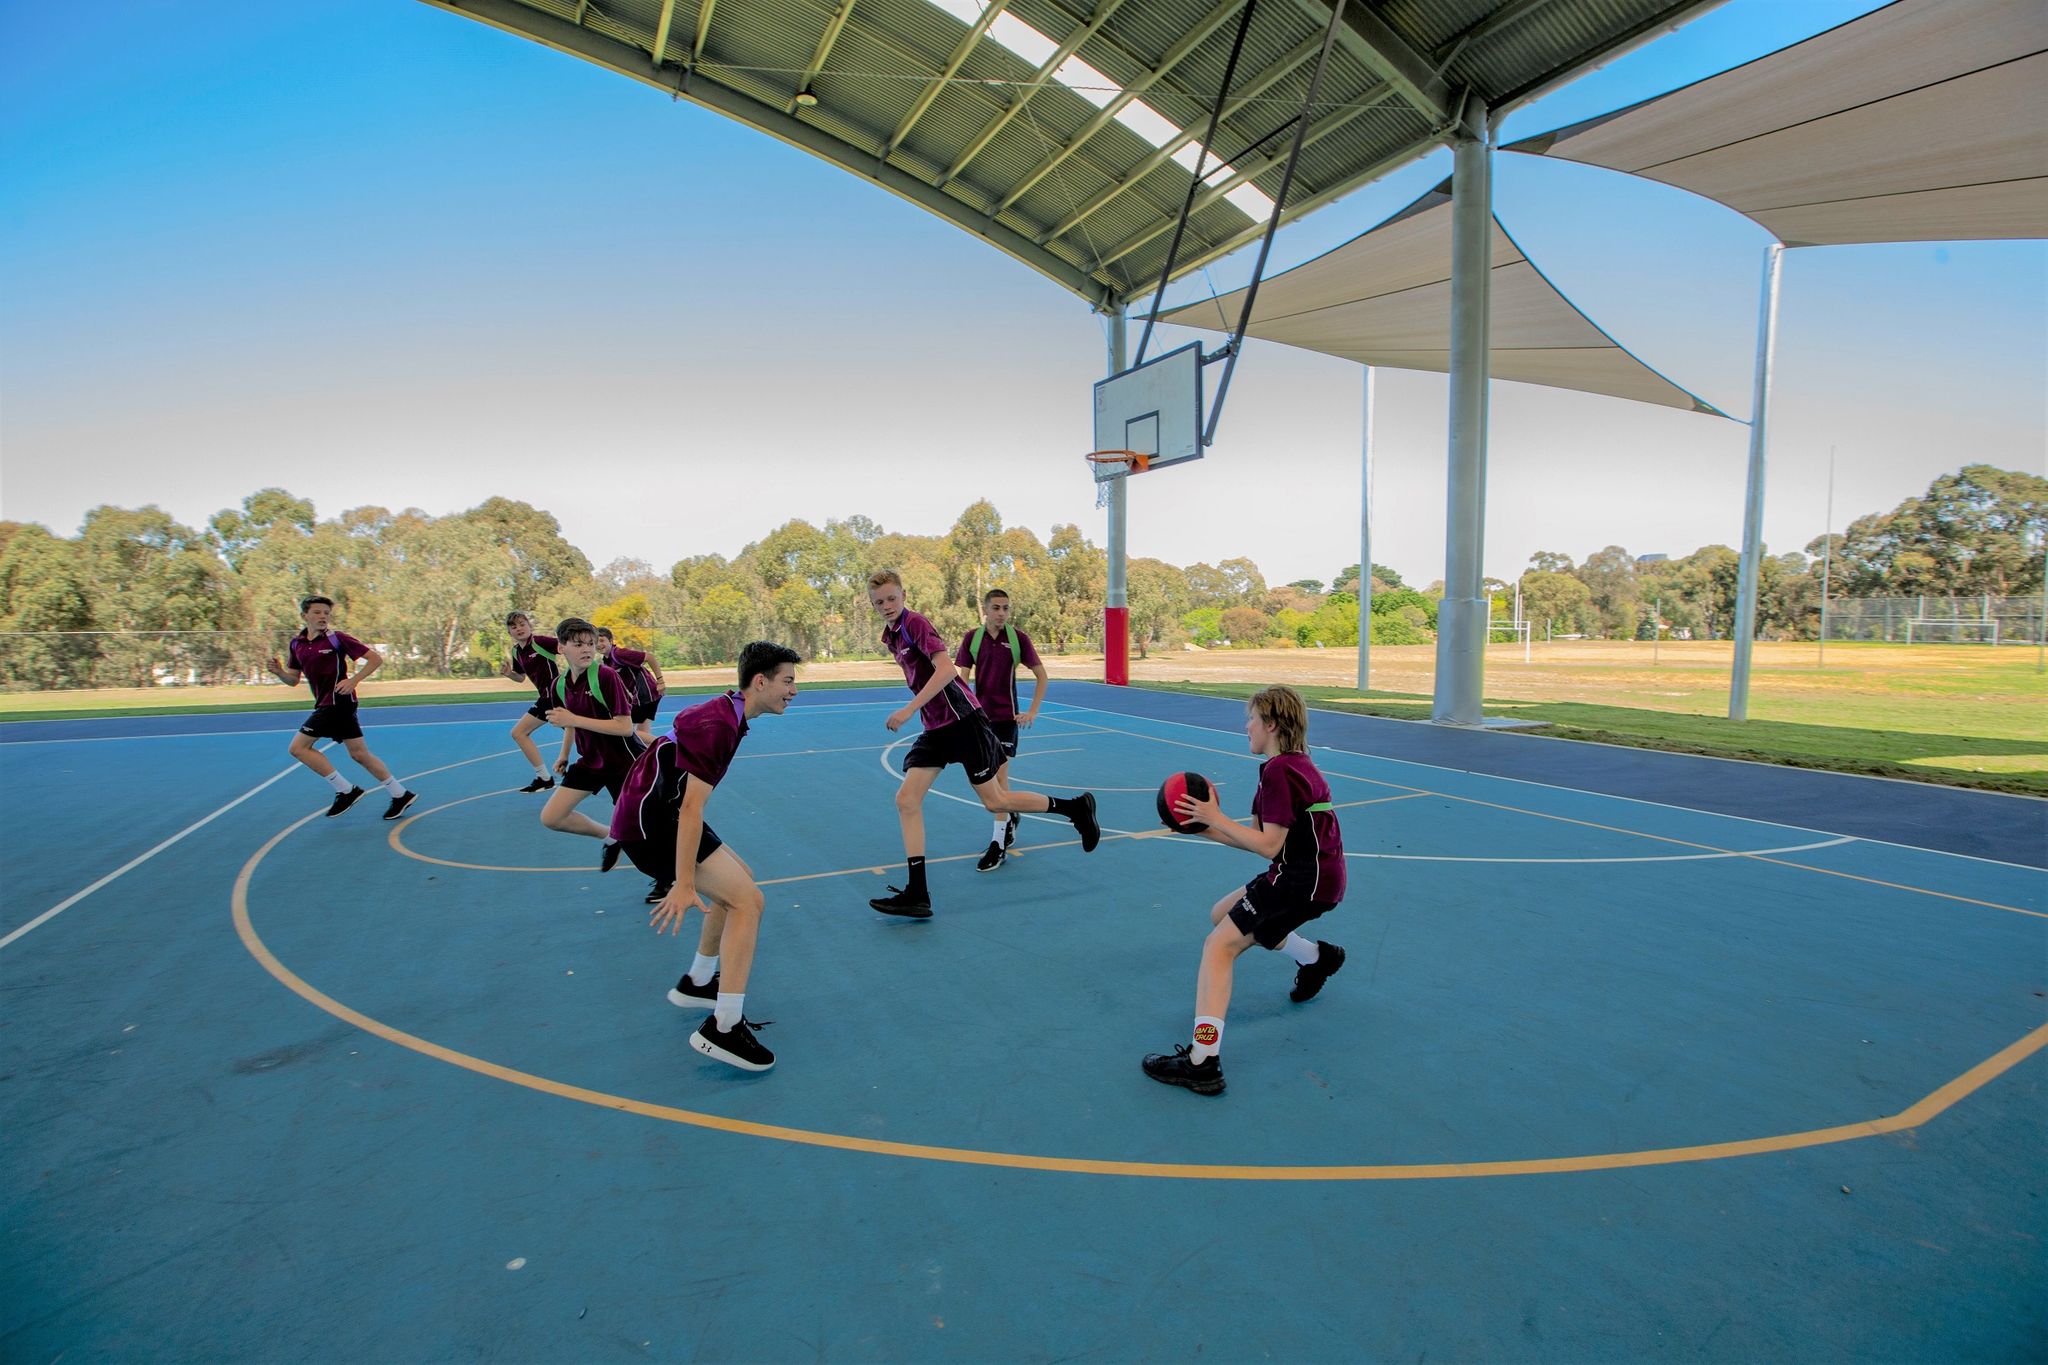 School students playing basketball on an outdoor blue acrylic court